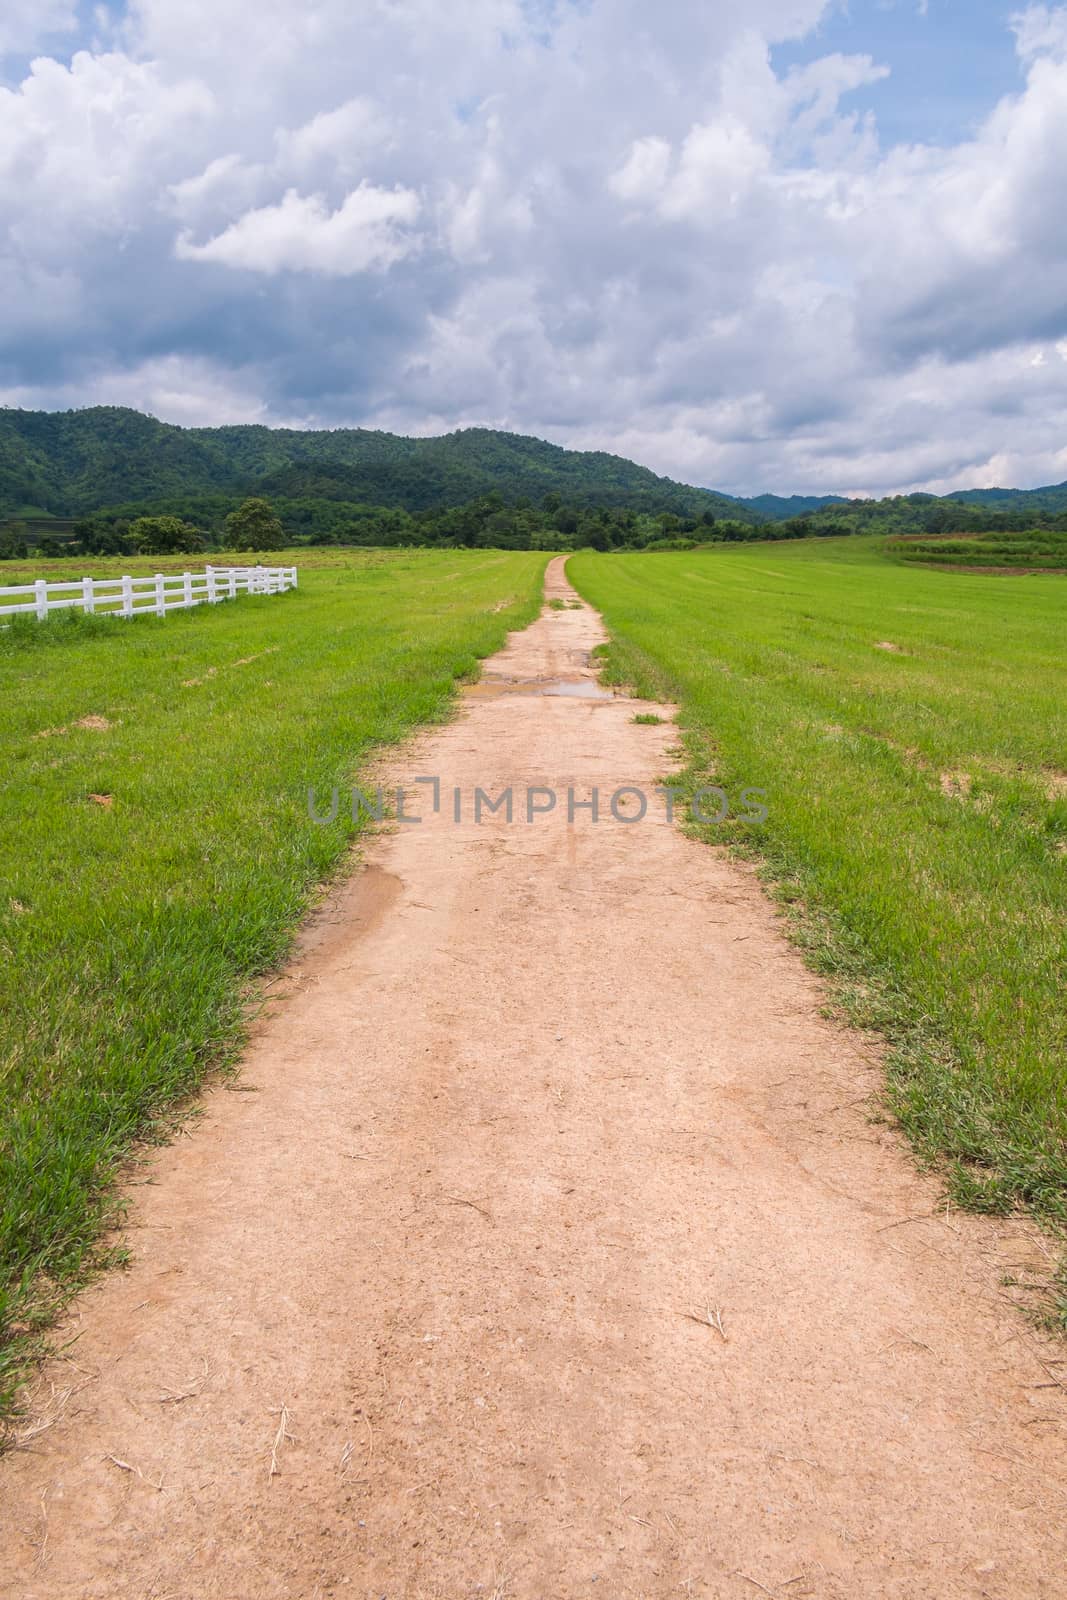 Dirt road in farm field with overcast sky